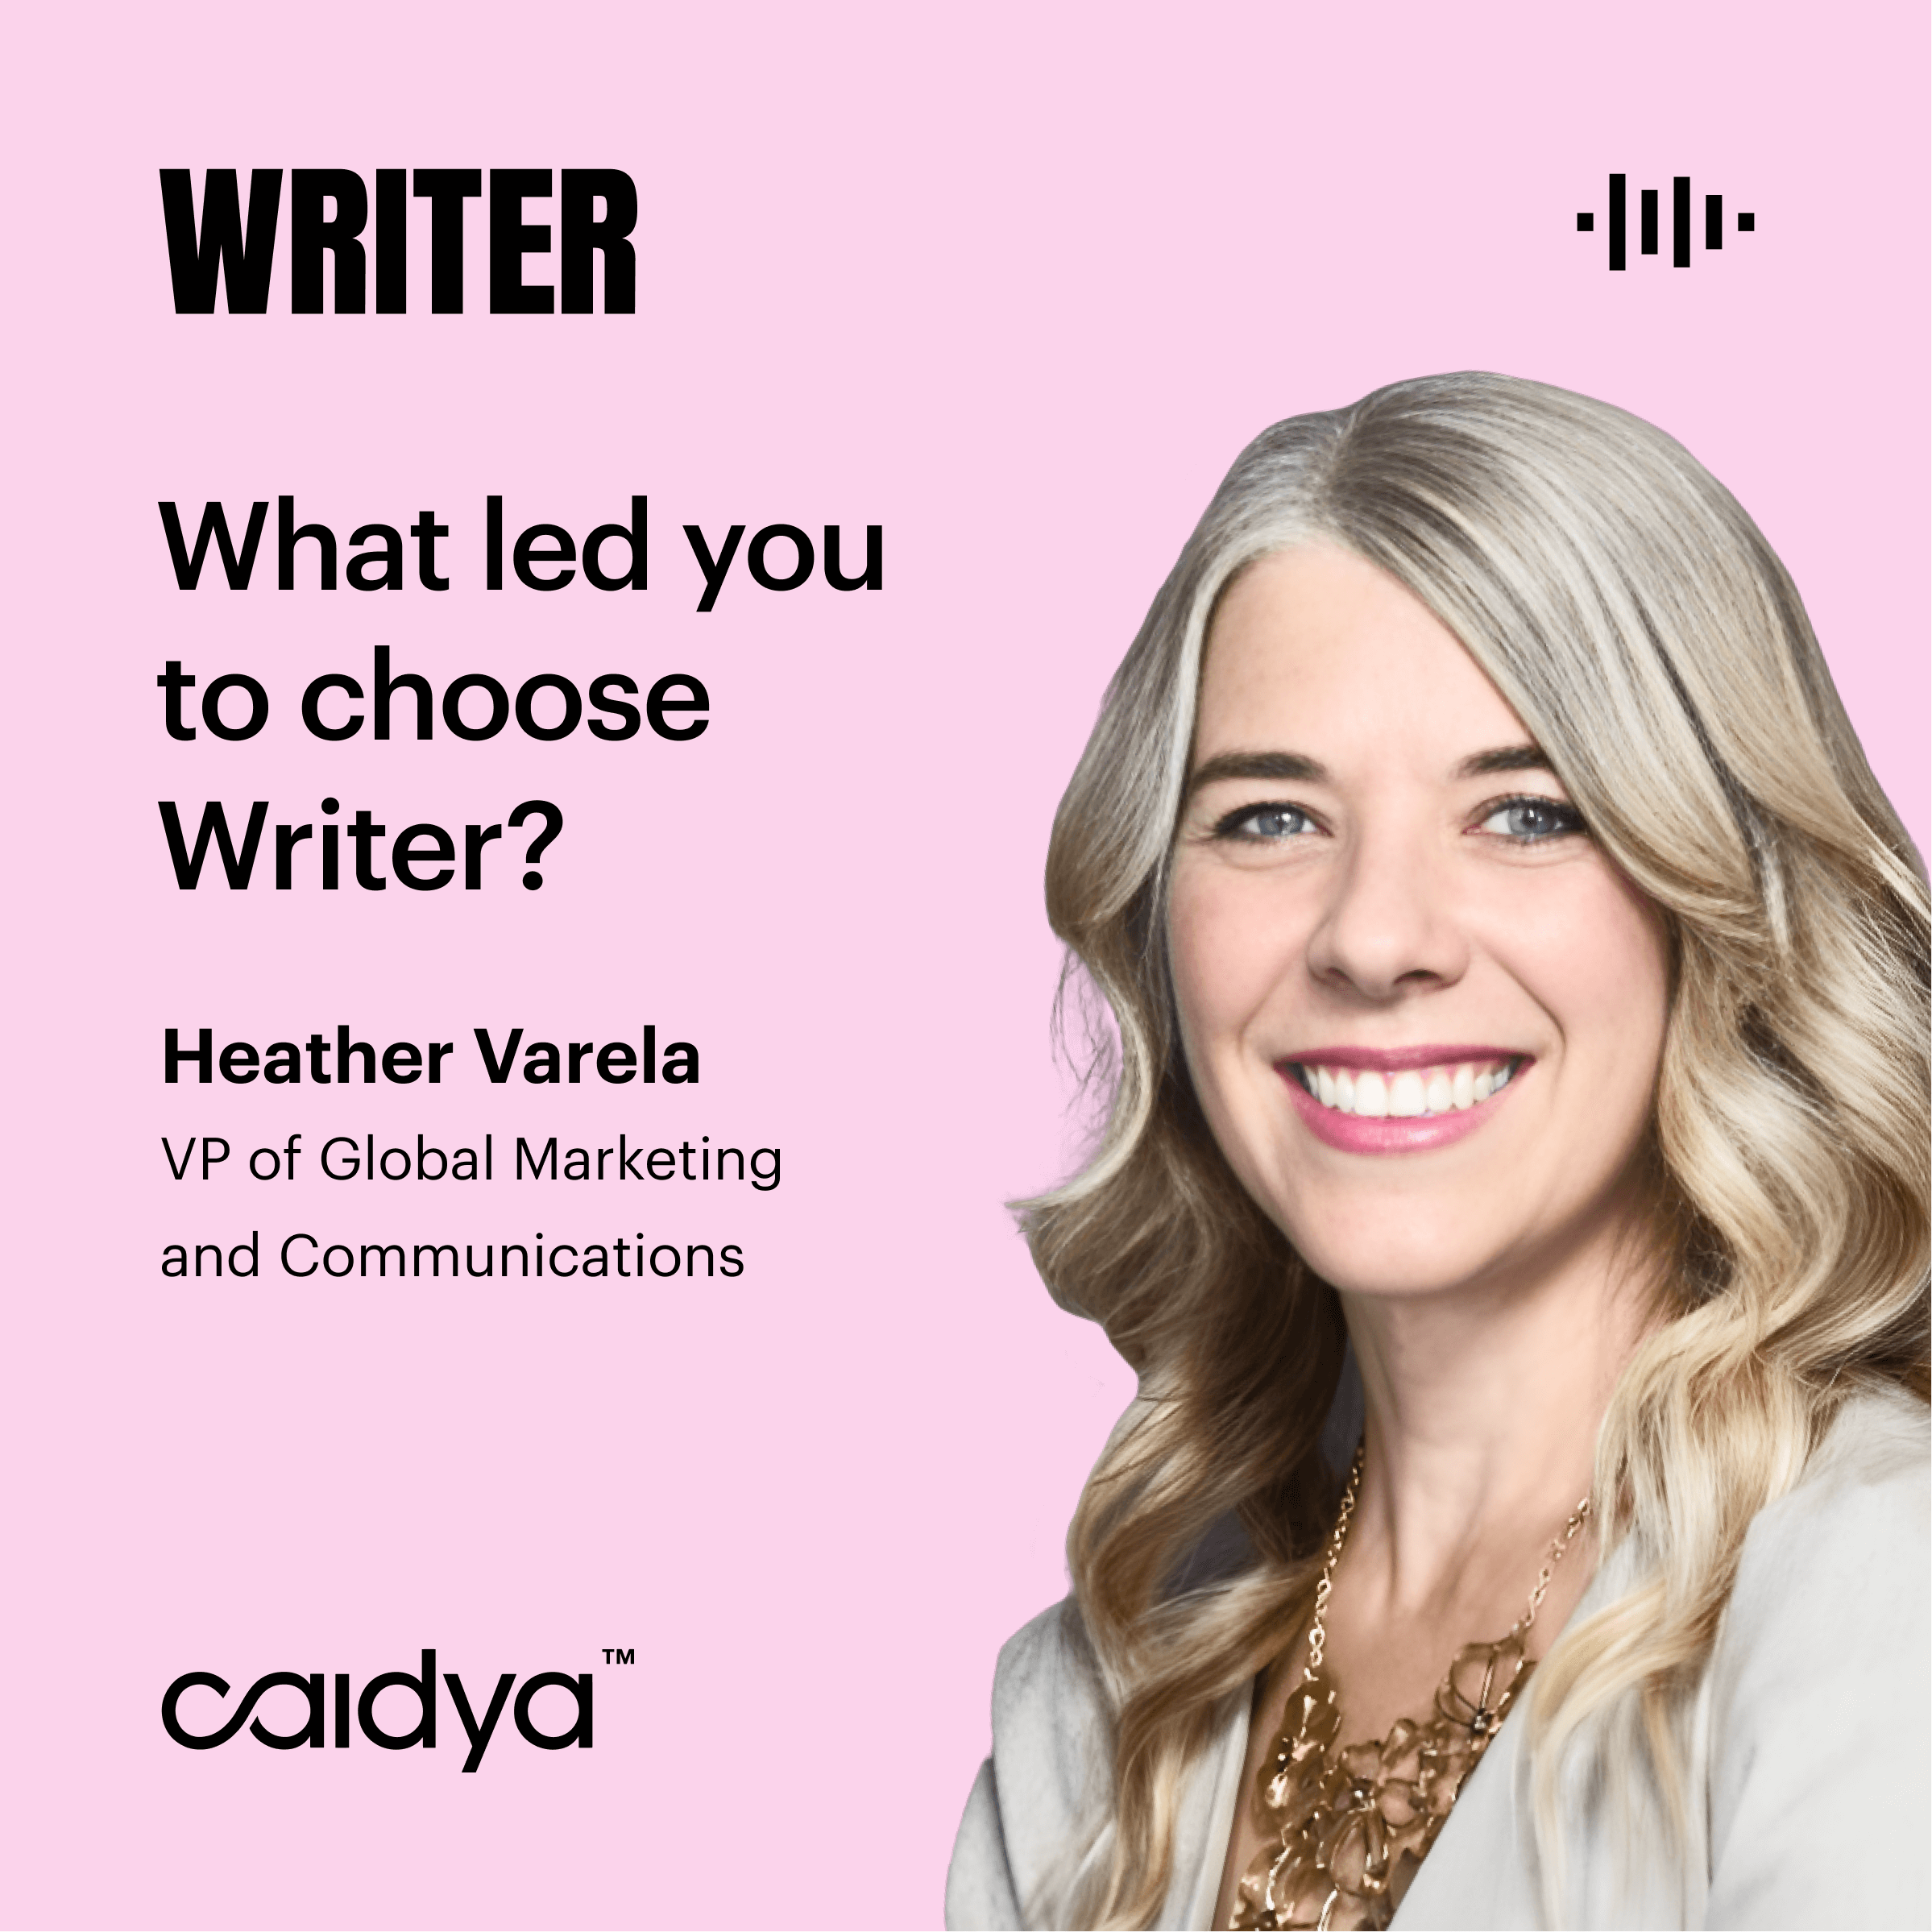 What led you to choose Writer?